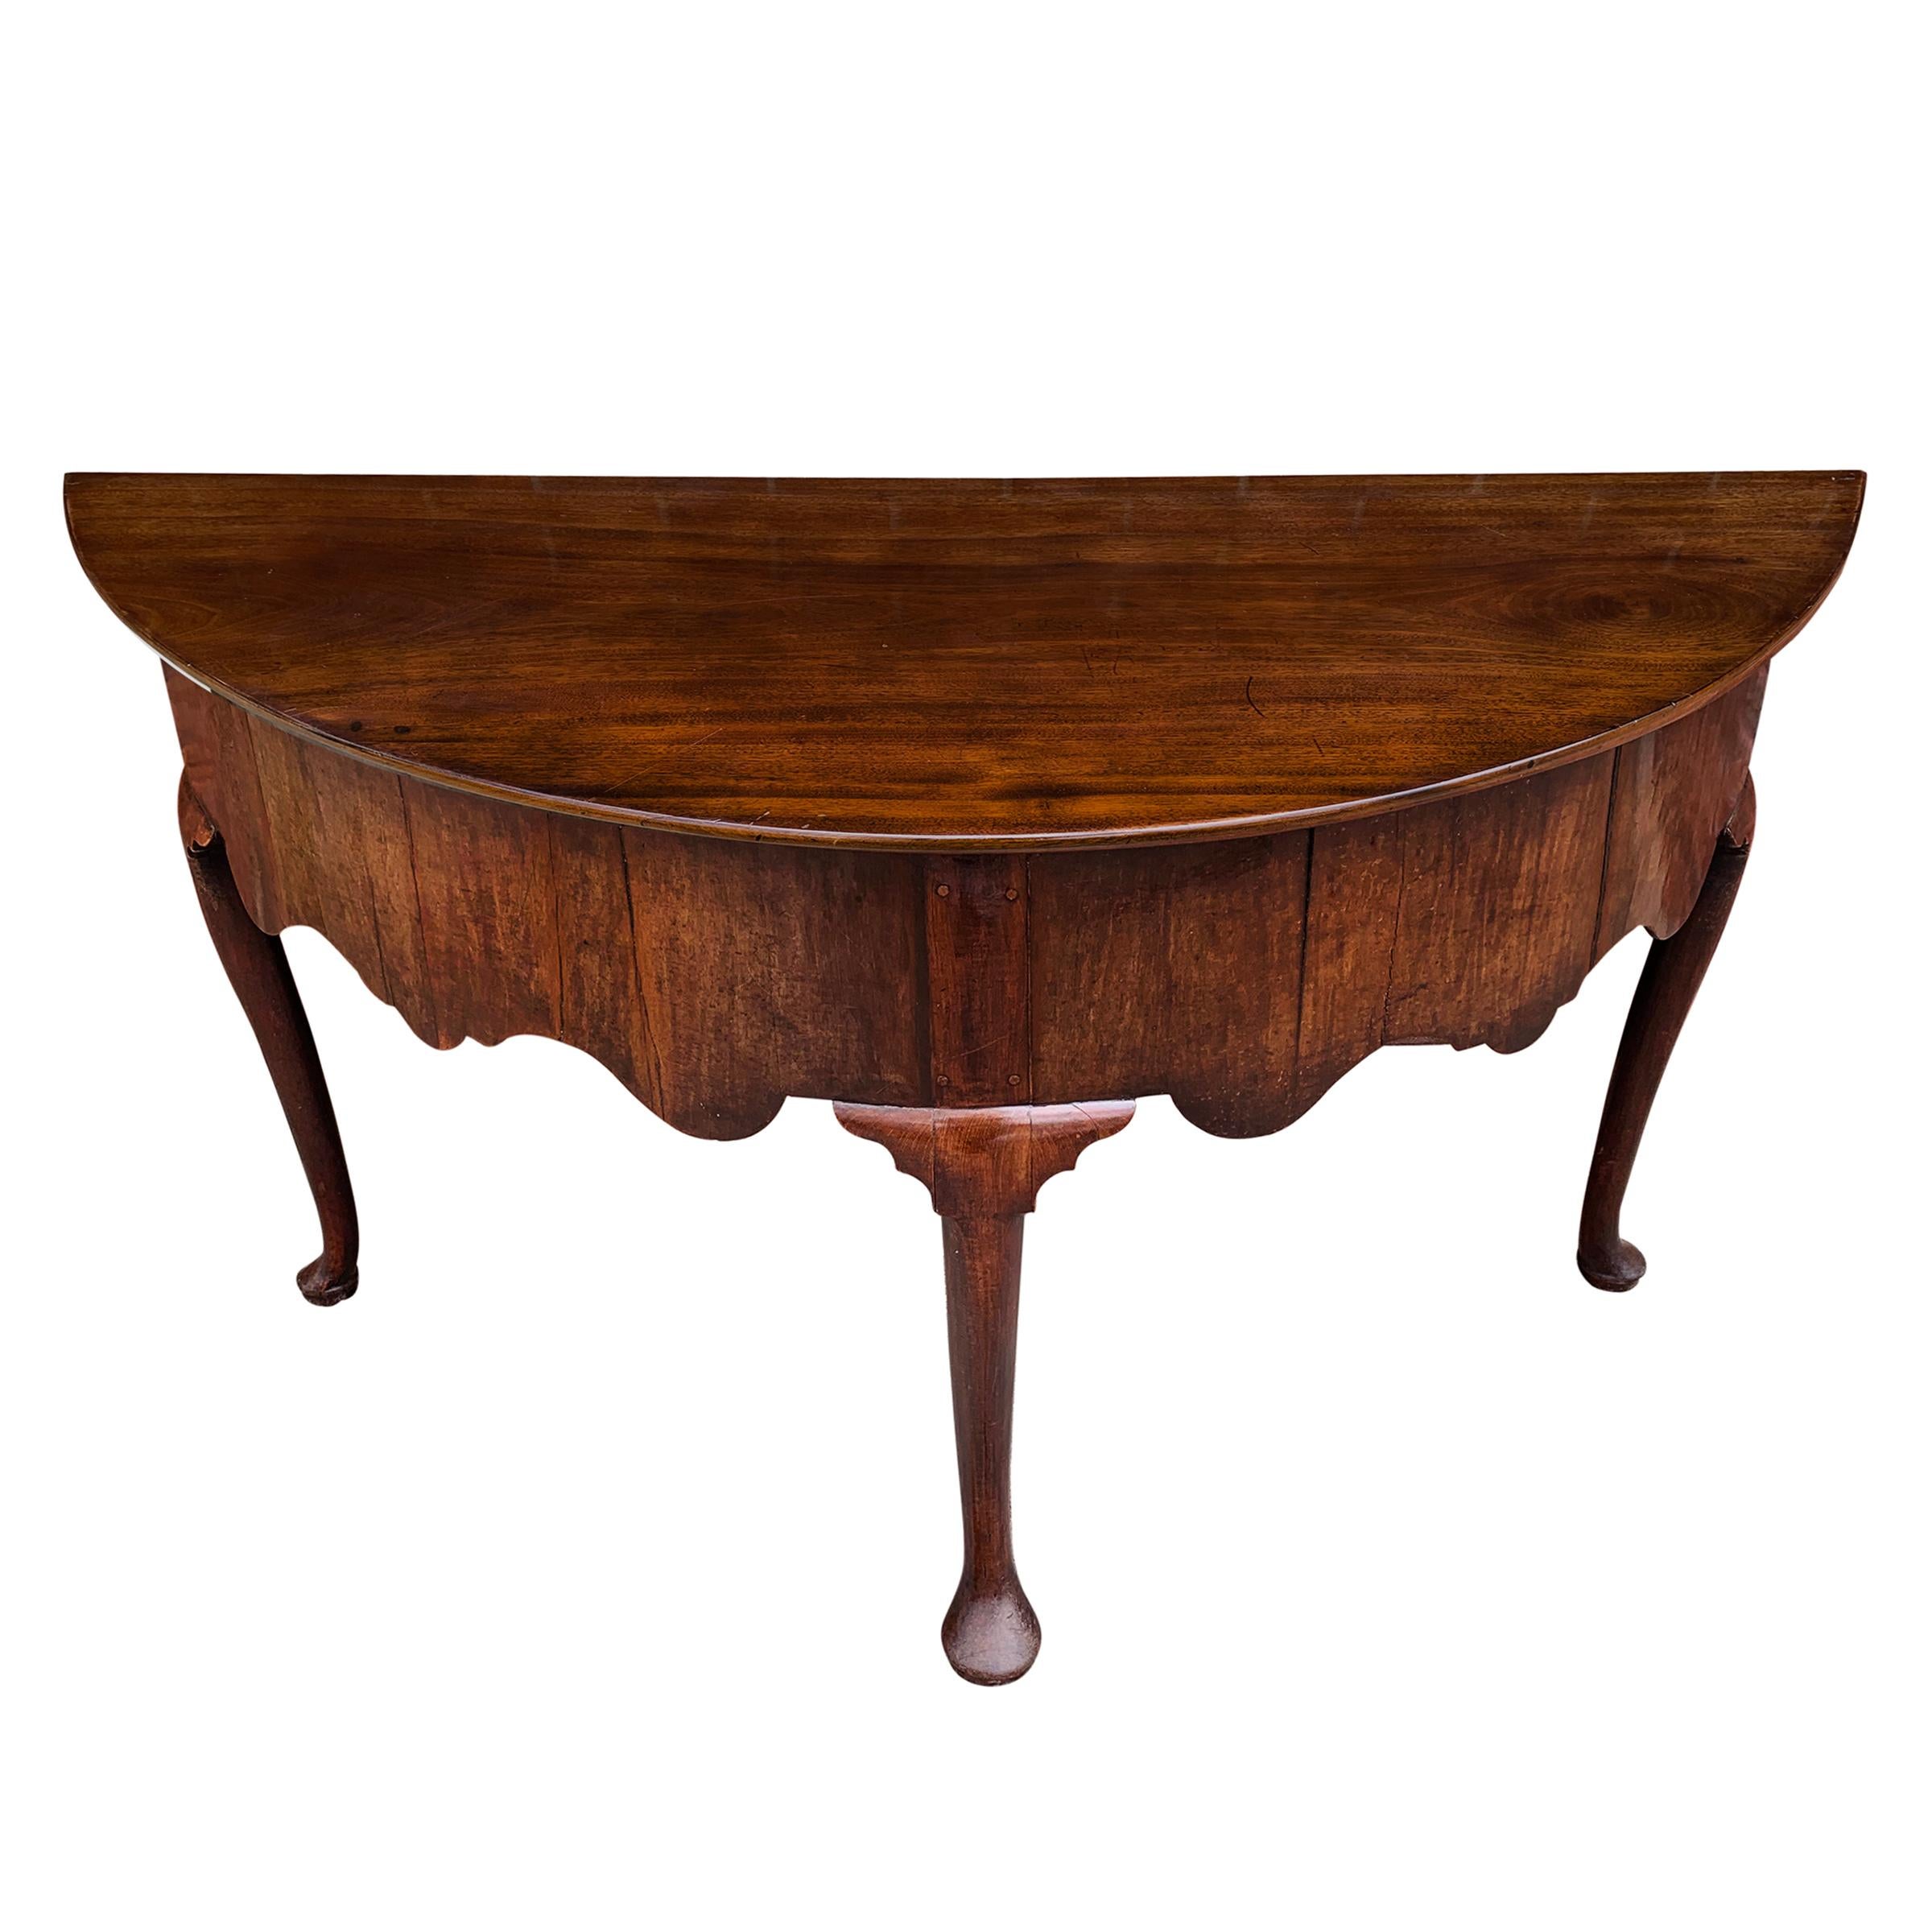 An incredible 18th century English Queen Anne style mahogany demilune table with an exaggerated wide scalloped apron and three cabriole legs ending in wide pad feet, the center foot being larger than the other two. The top is of one piece of wood